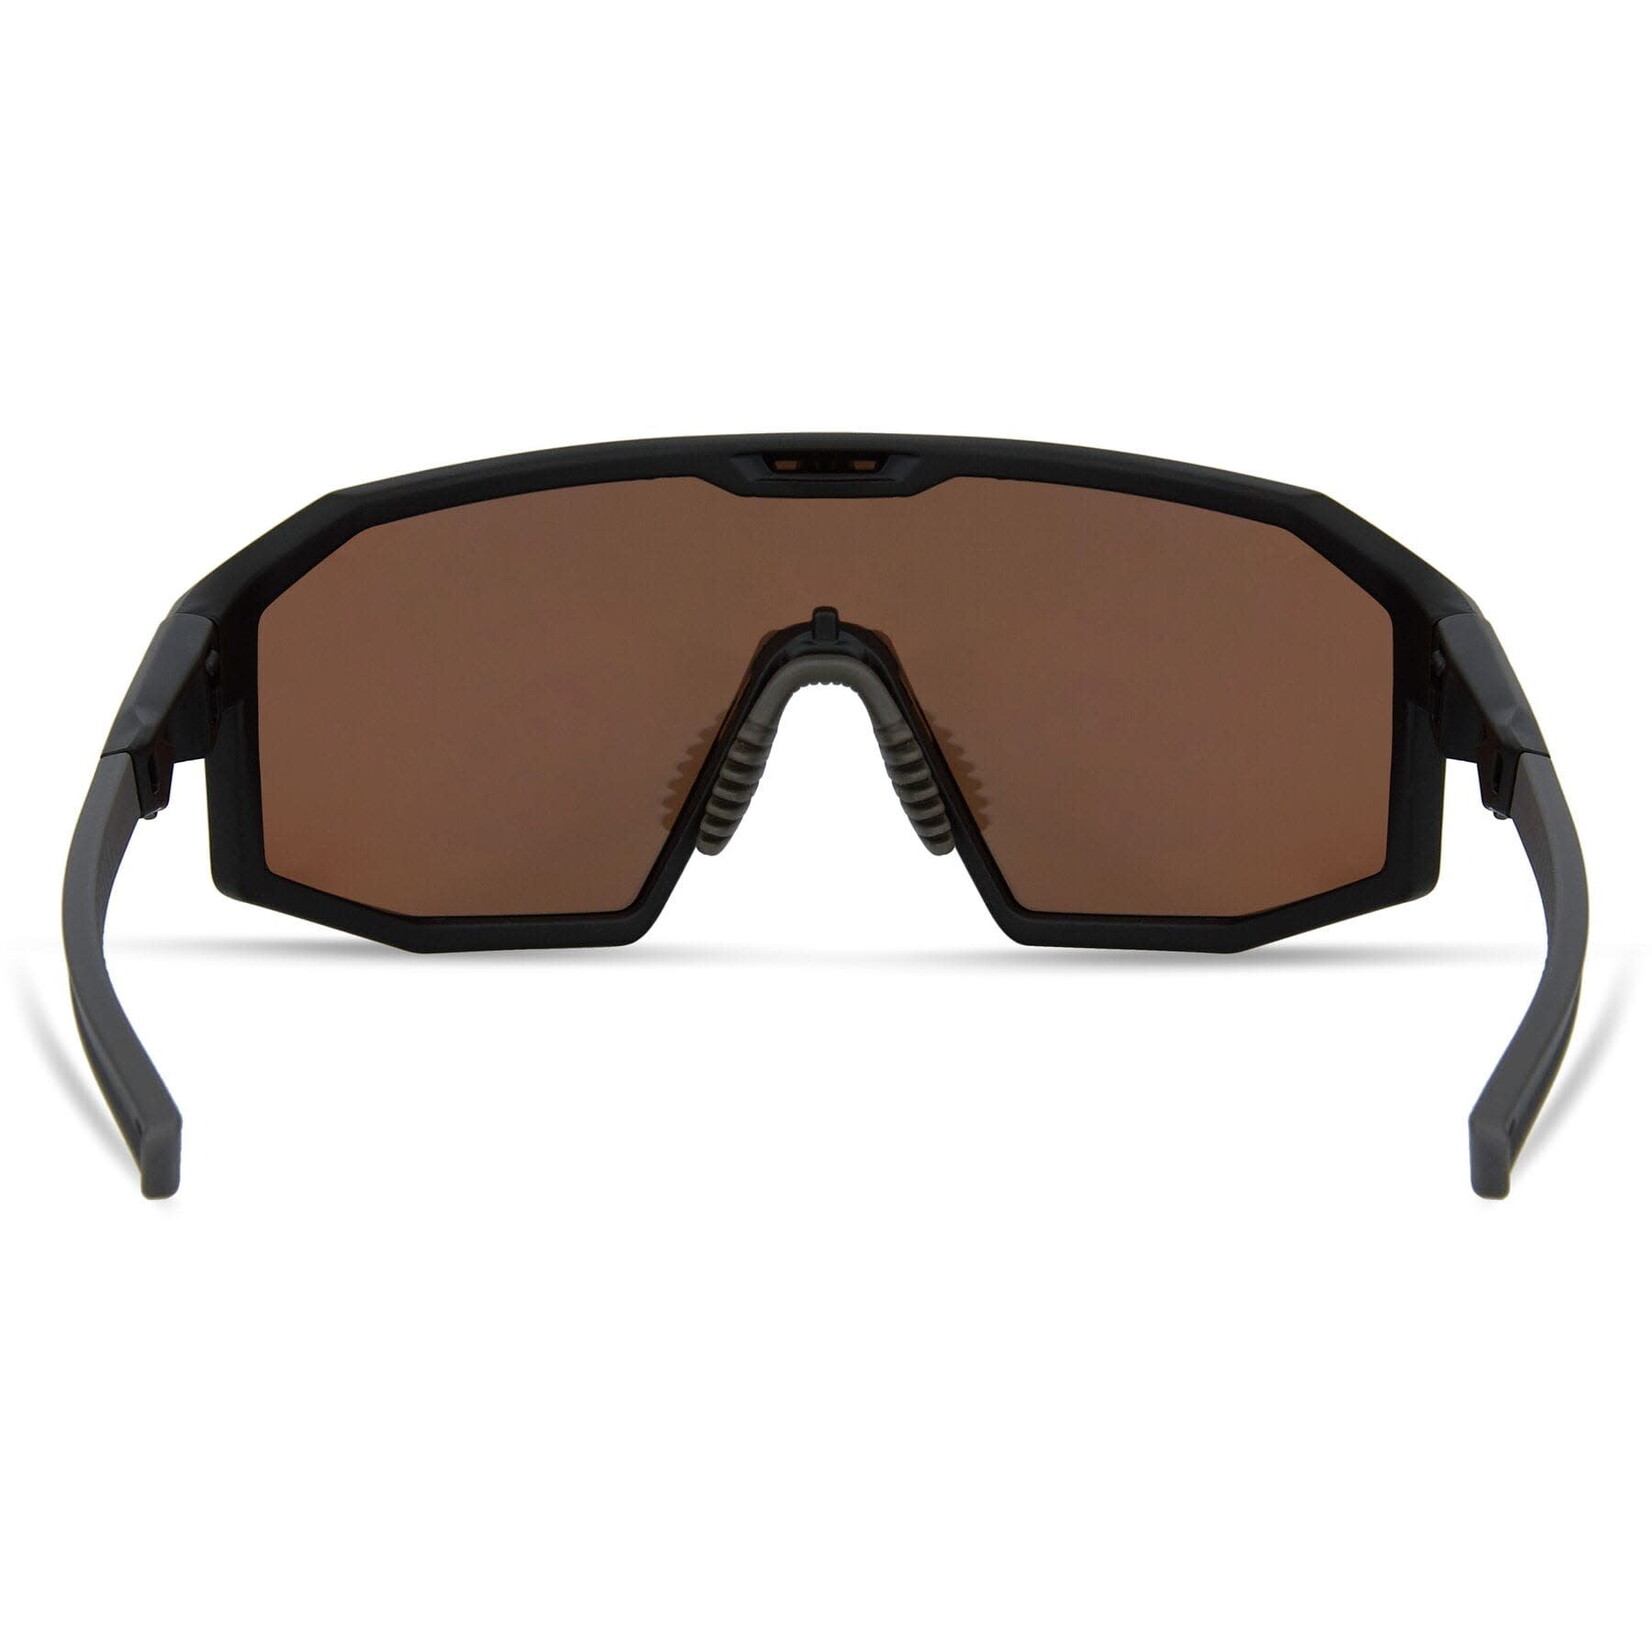 Madison Madison Enigma Glasses - 3 pack - matt black / bronze mirror / amber and clear lens